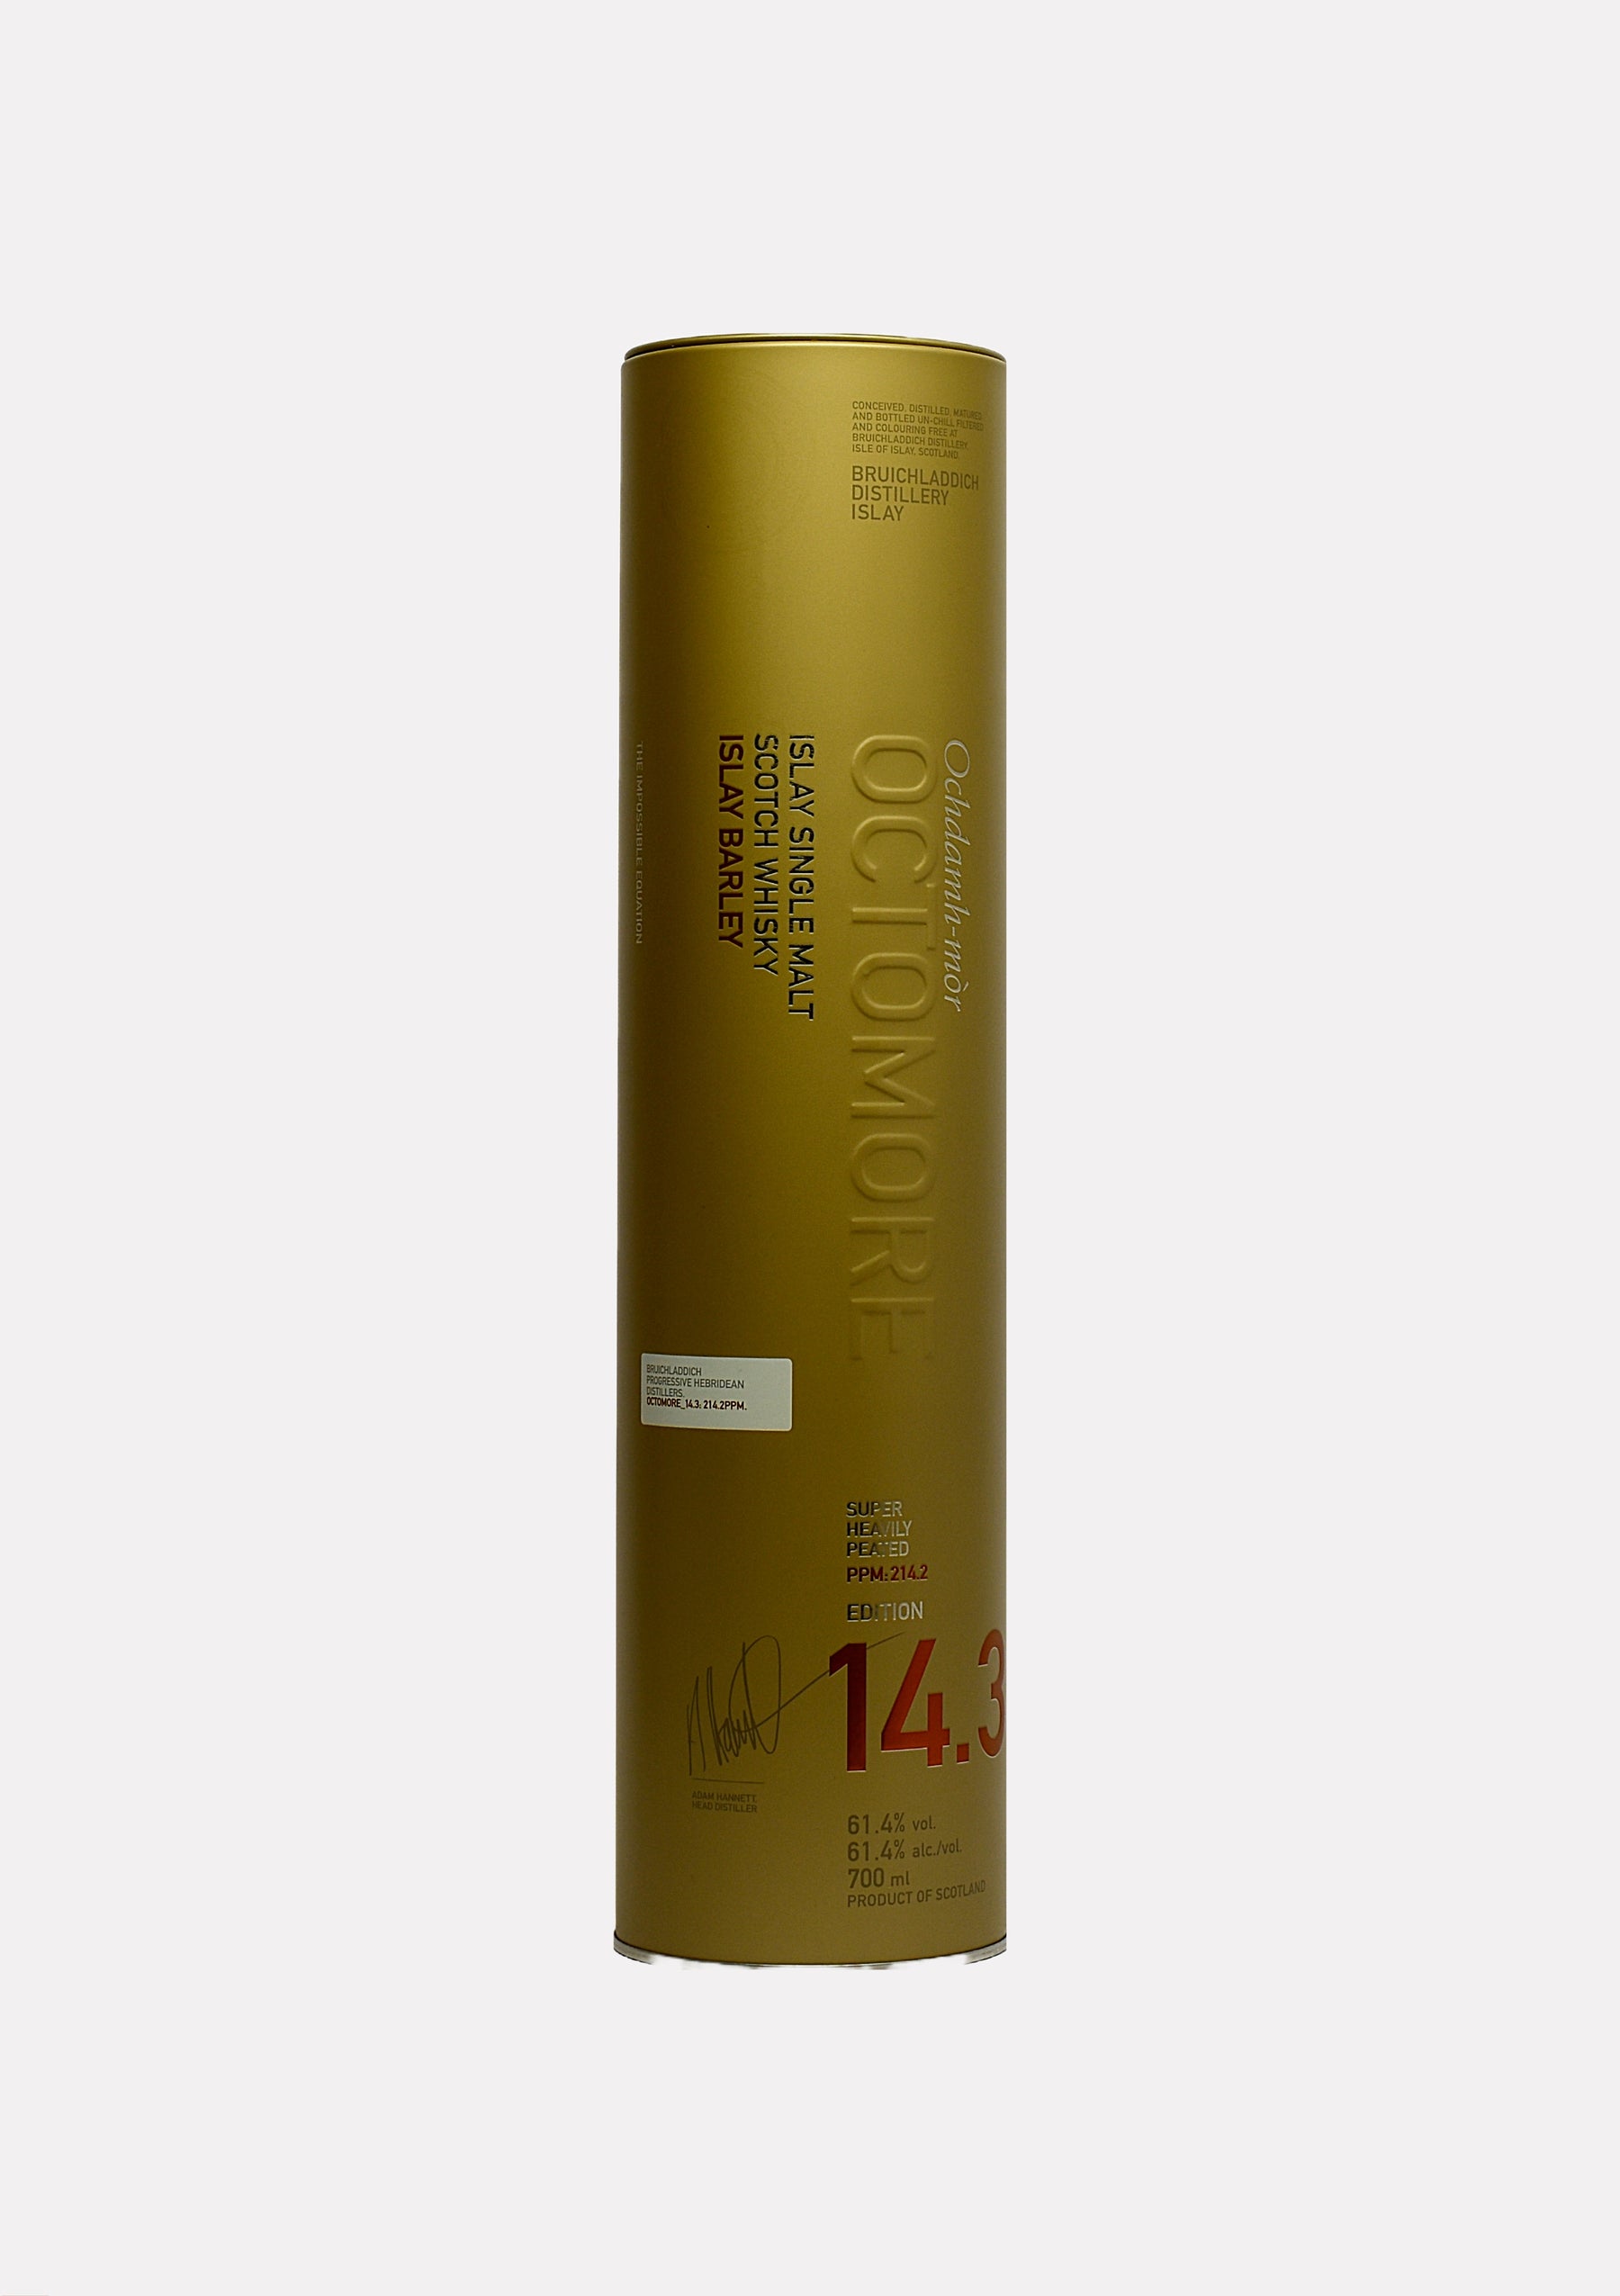 Octomore 14.3 214.2 ppm